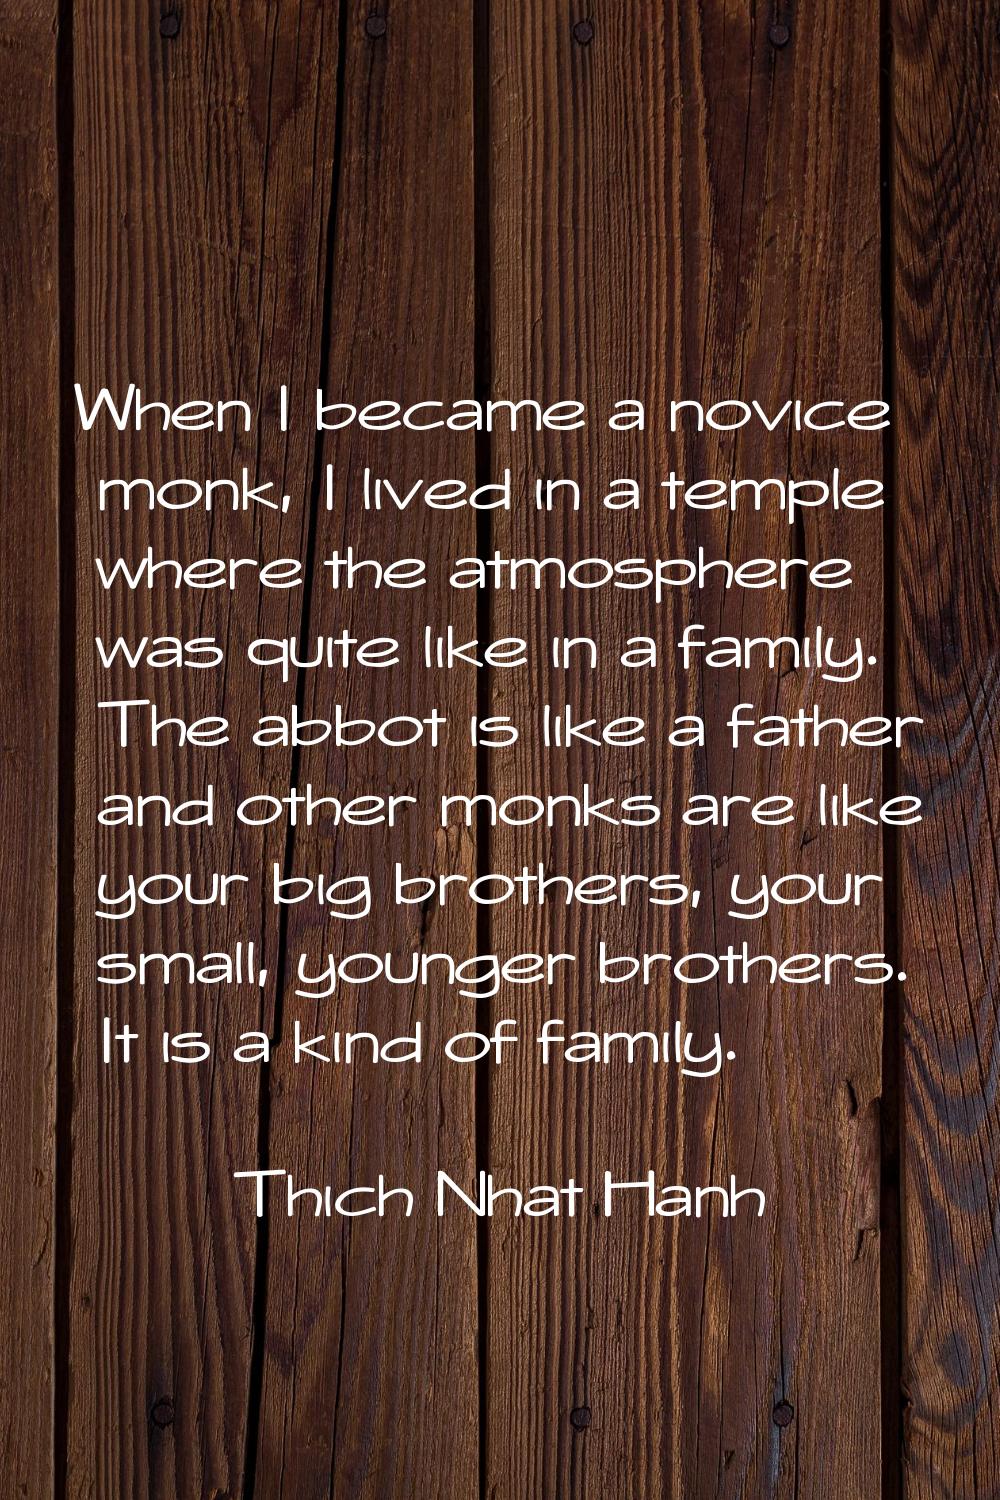 When I became a novice monk, I lived in a temple where the atmosphere was quite like in a family. T